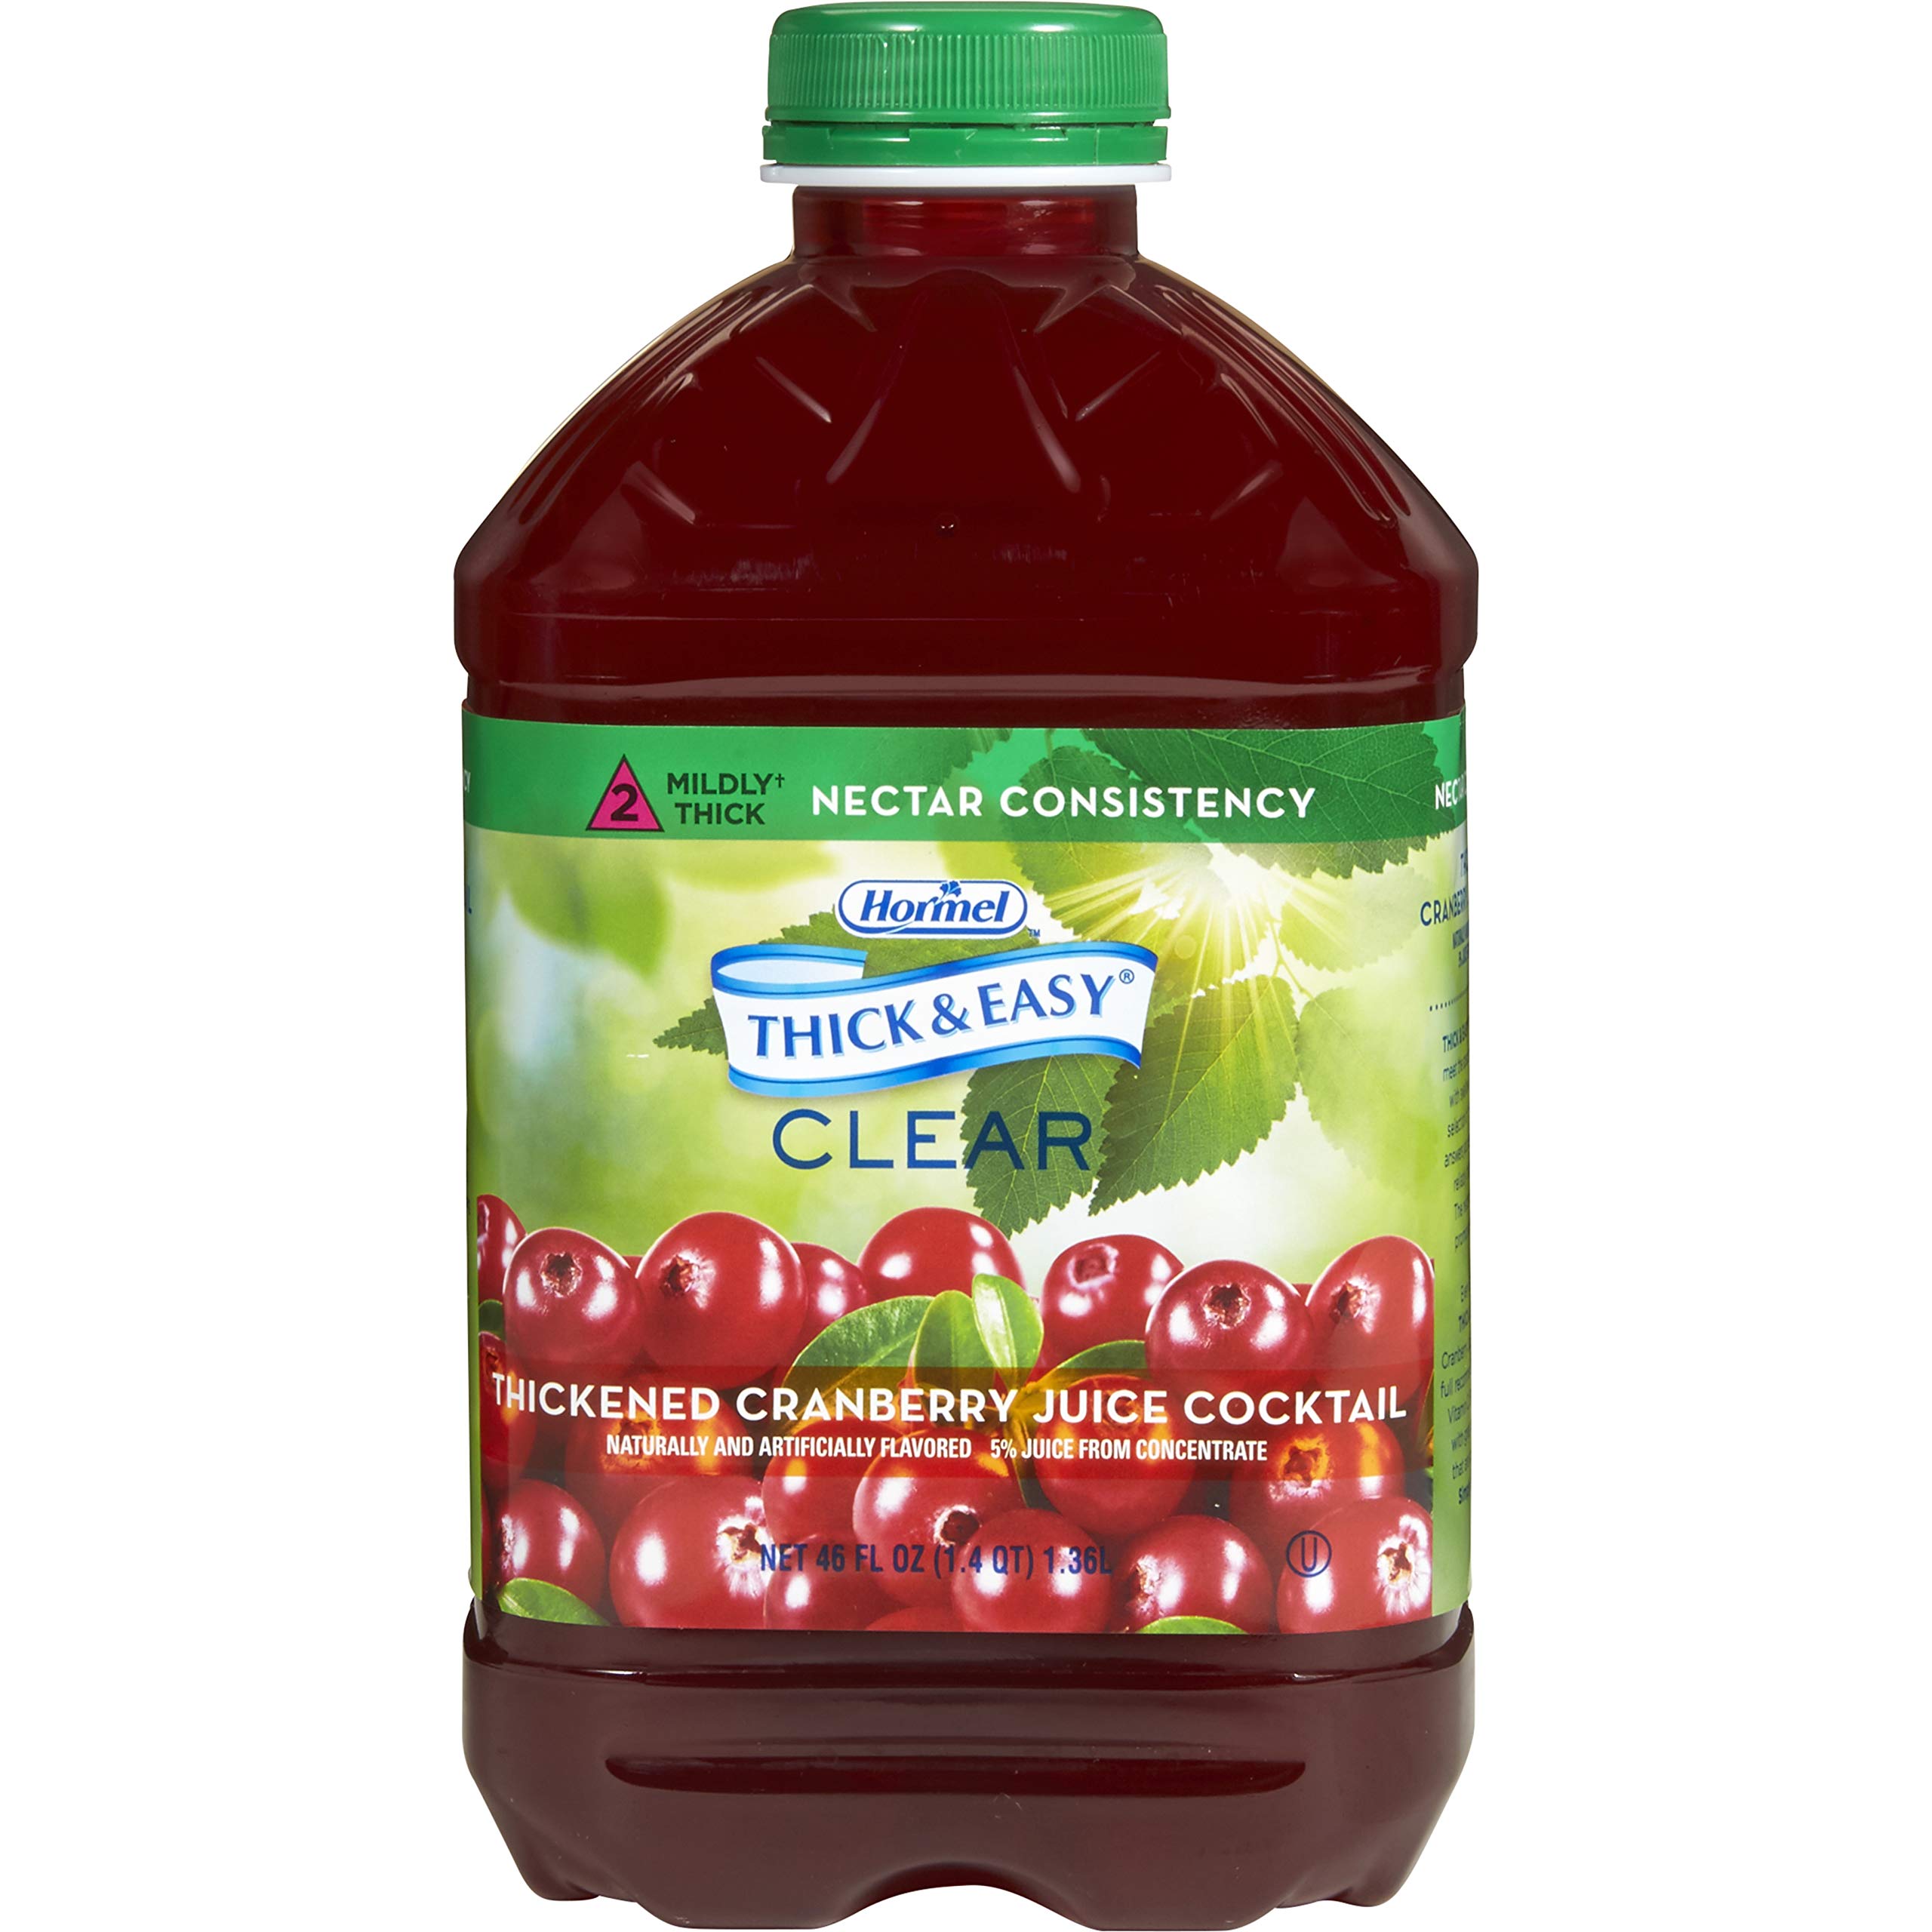 Thick & Easy Thickened Beverage 46 oz. Bottle Cranberry Juice Cocktail Flavor Ready to Use Nectar Consistency, 15813 - Sold by: Pack of One